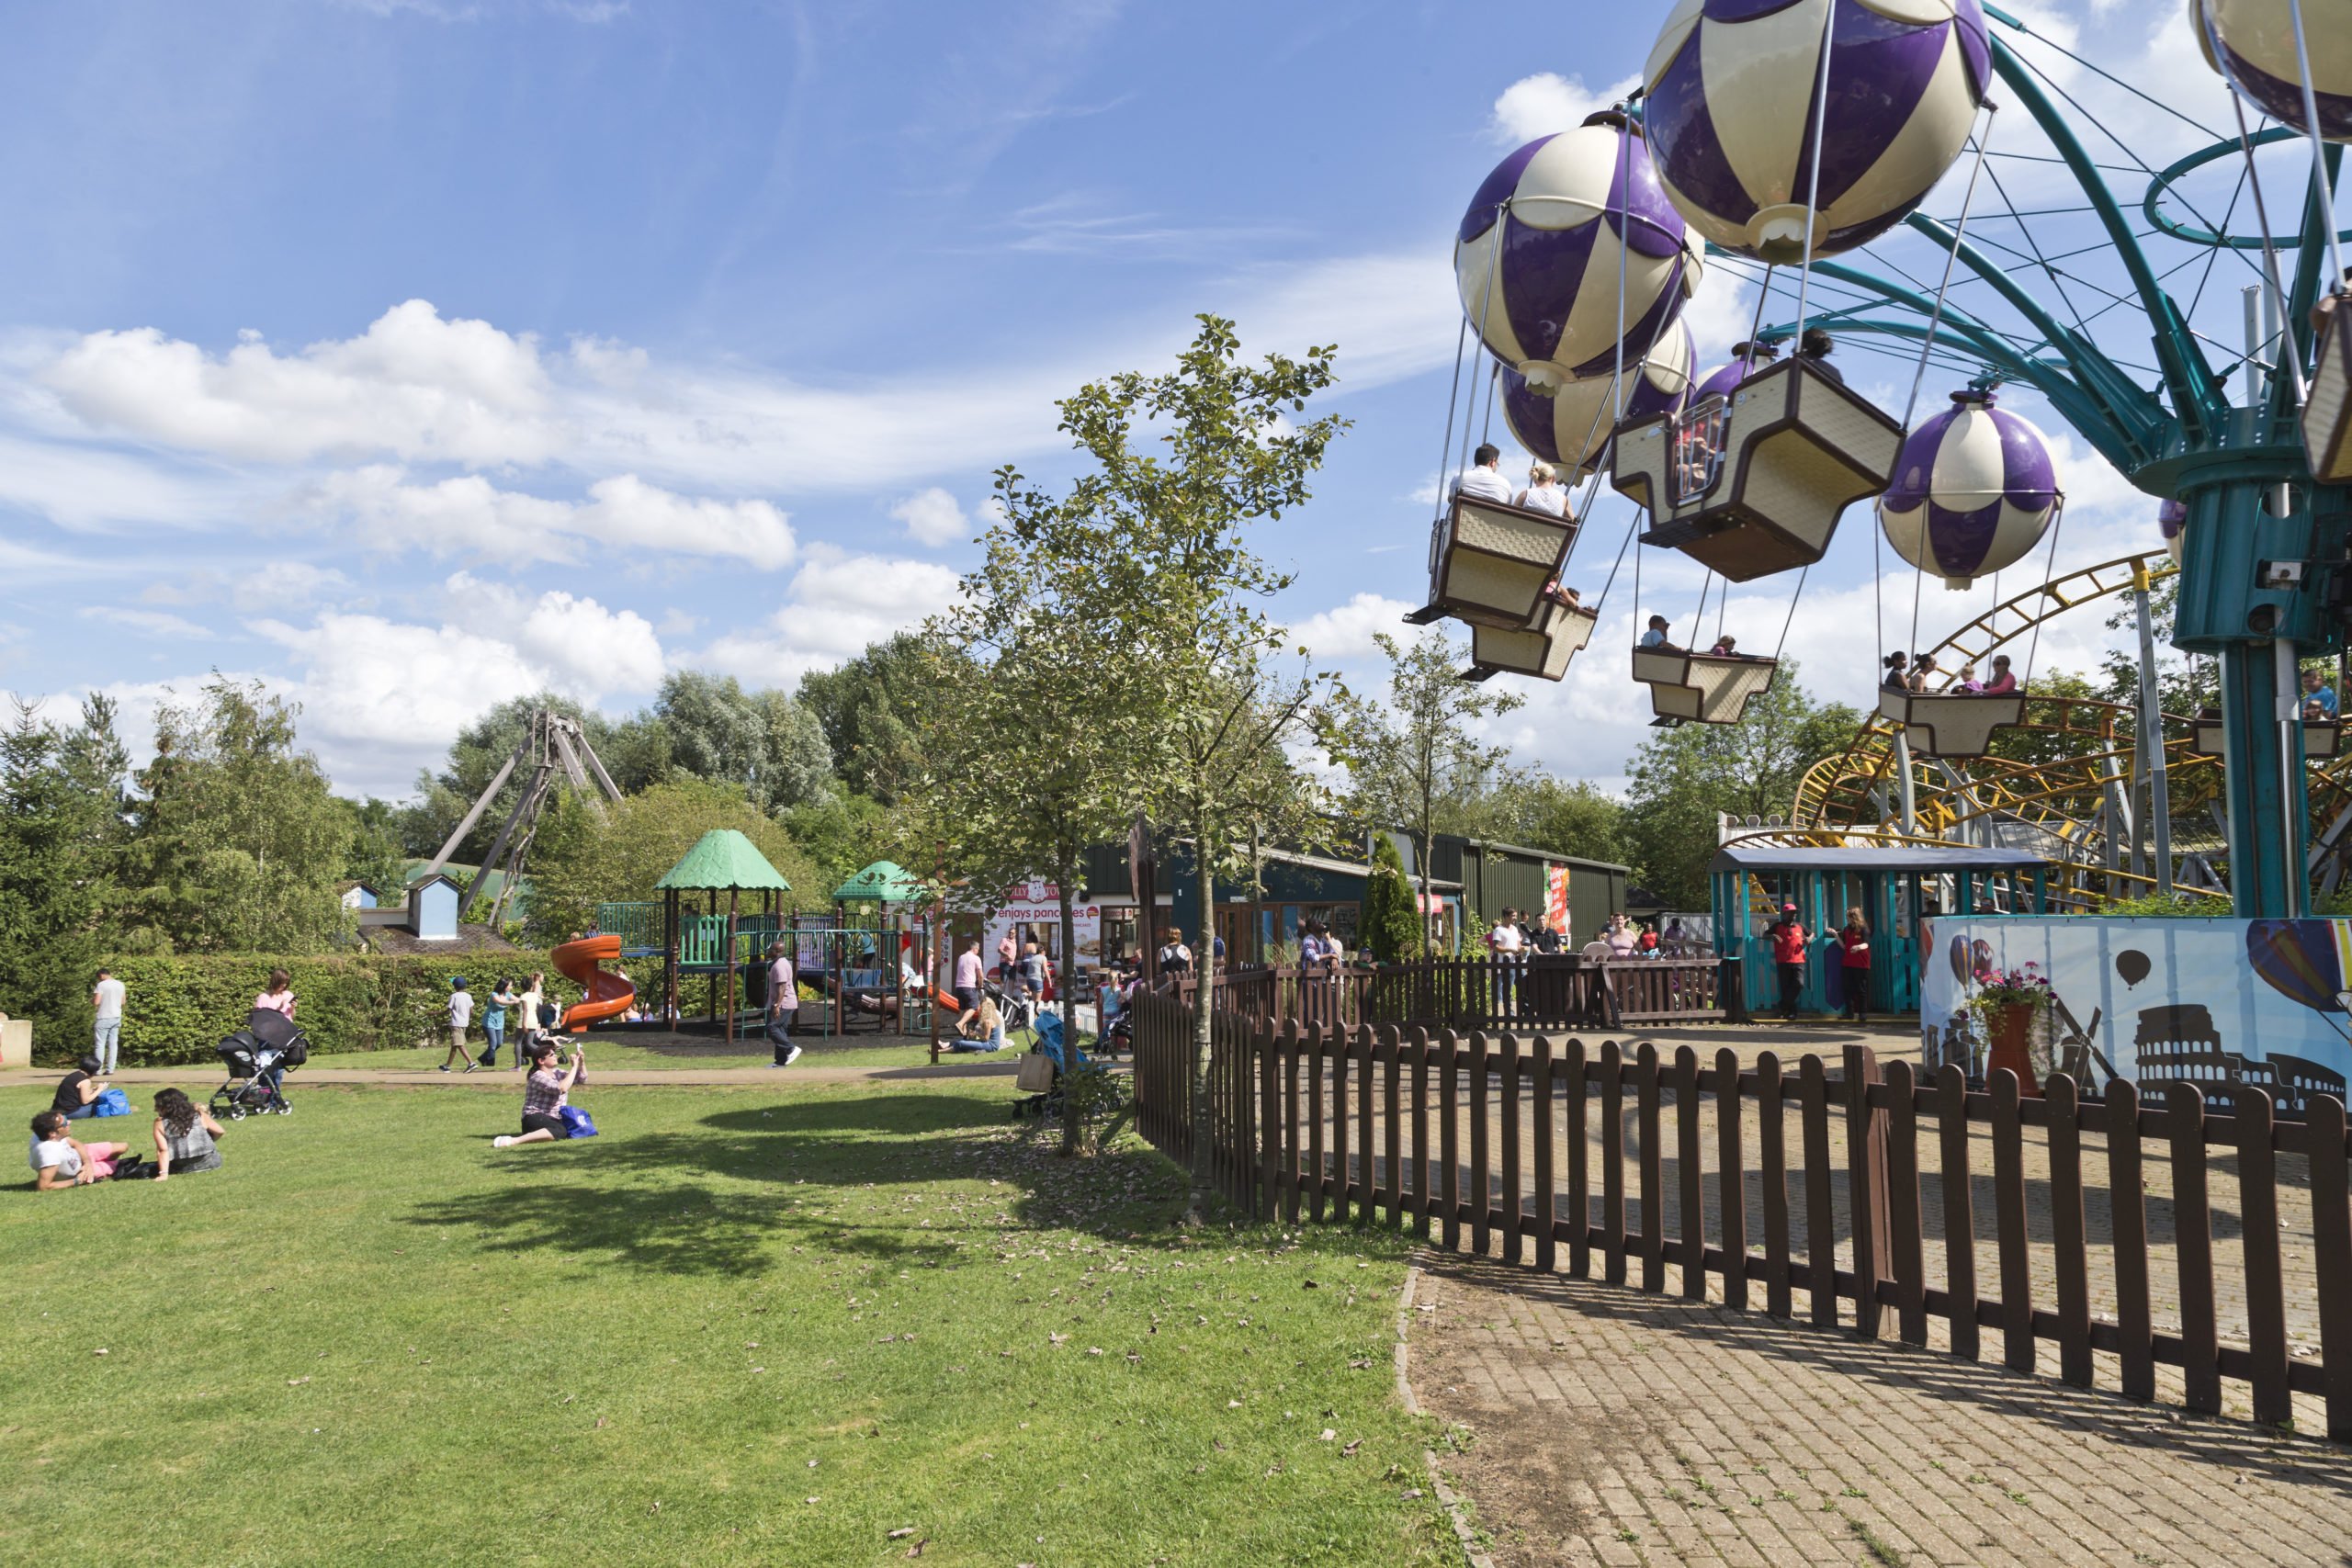 Day of fun at Gulliver’s Land to raise funds for local Hospice